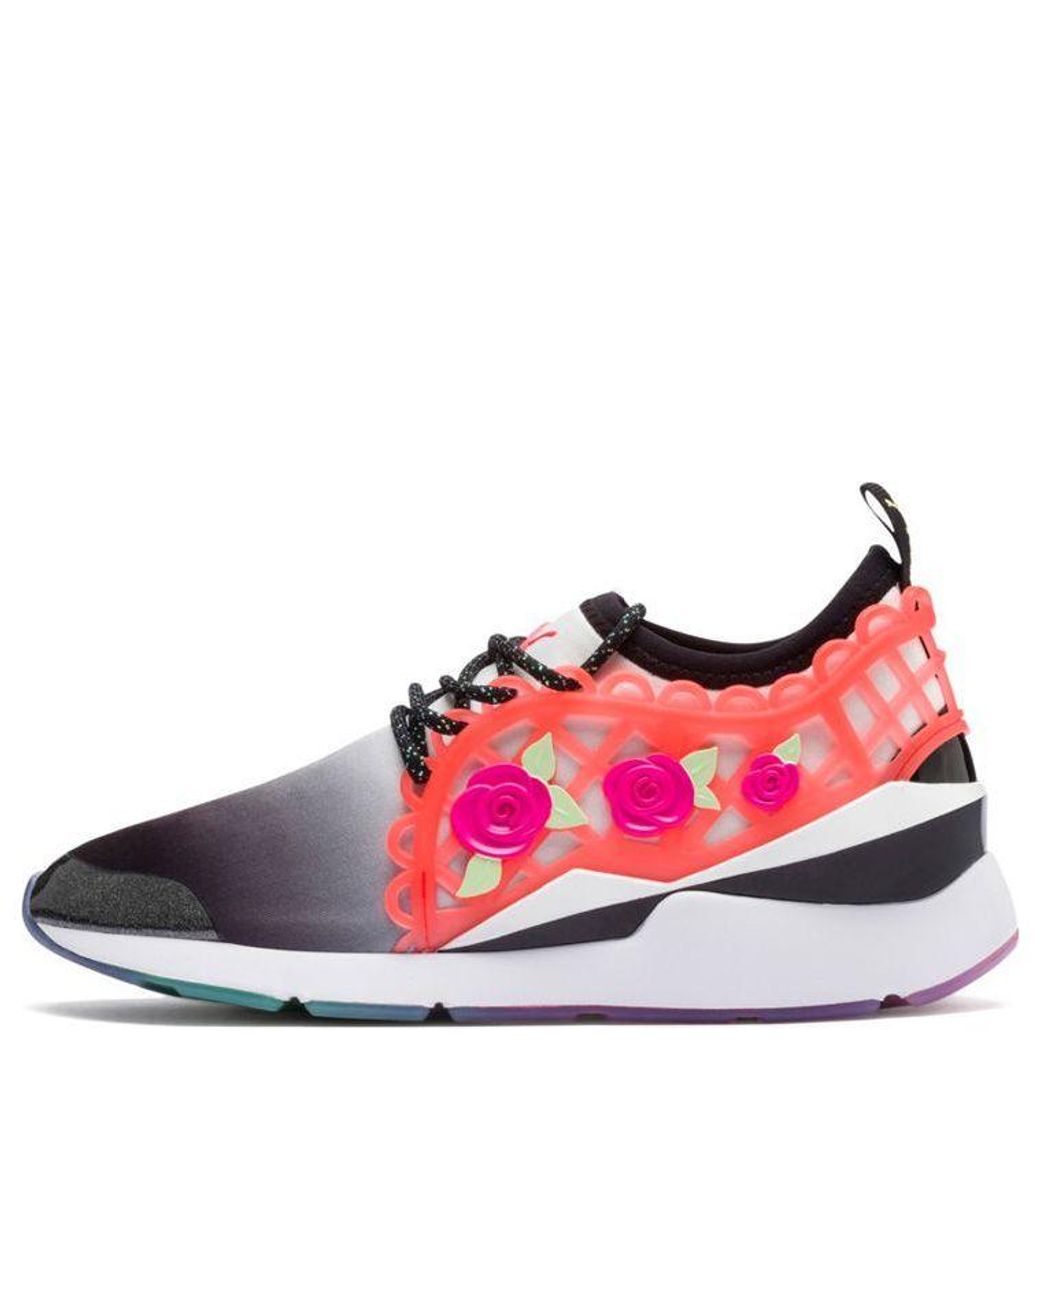 PUMA Sophia Webster X Muse '3d Flowers' in Red | Lyst